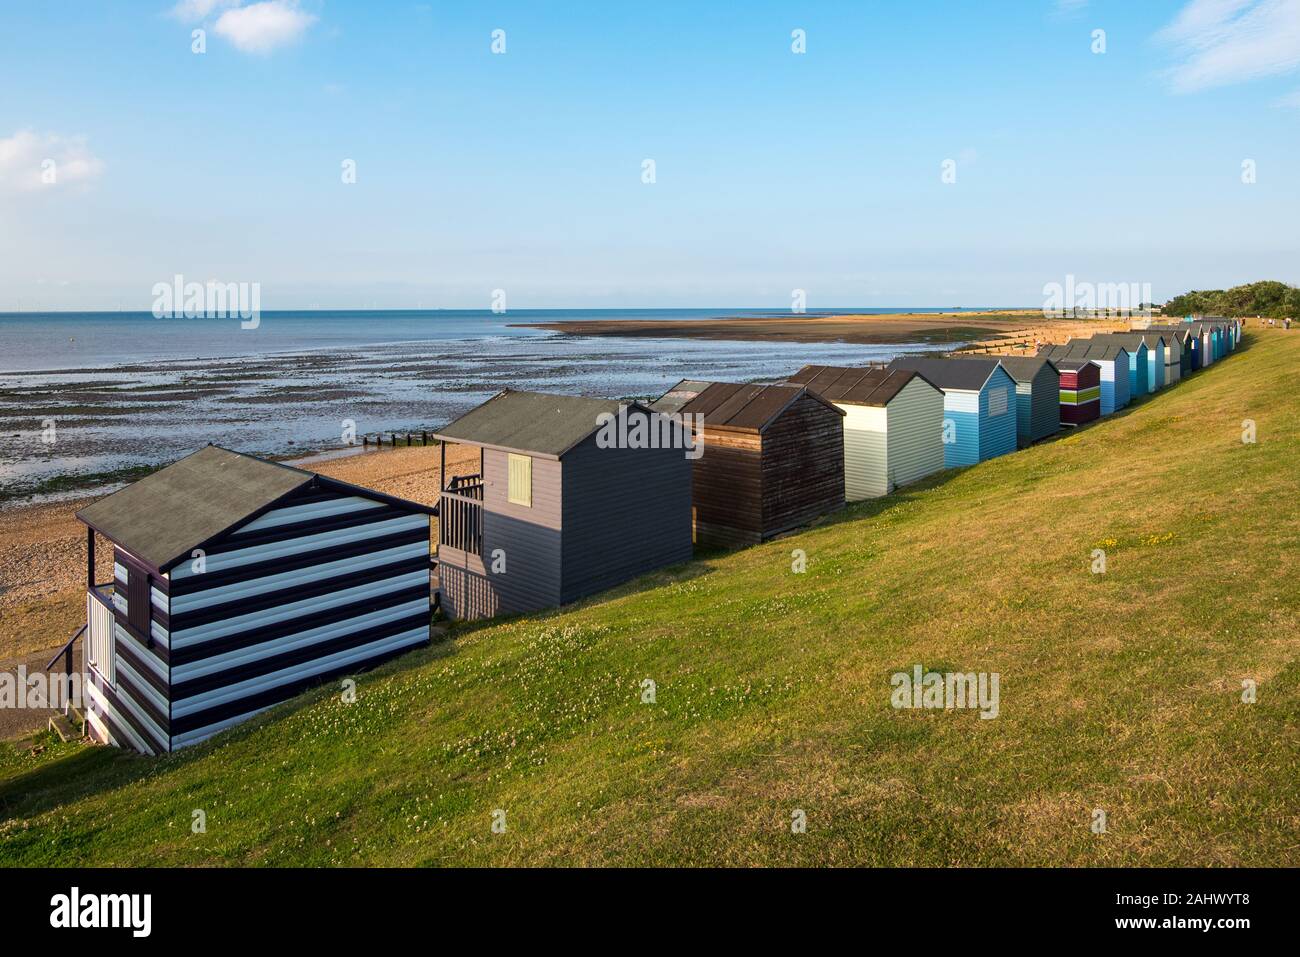 Multi-coloured holiday wooden beach huts facing the ocean  on the beach of Tankerton Whitstable coast,  Kent district England. Stock Photo